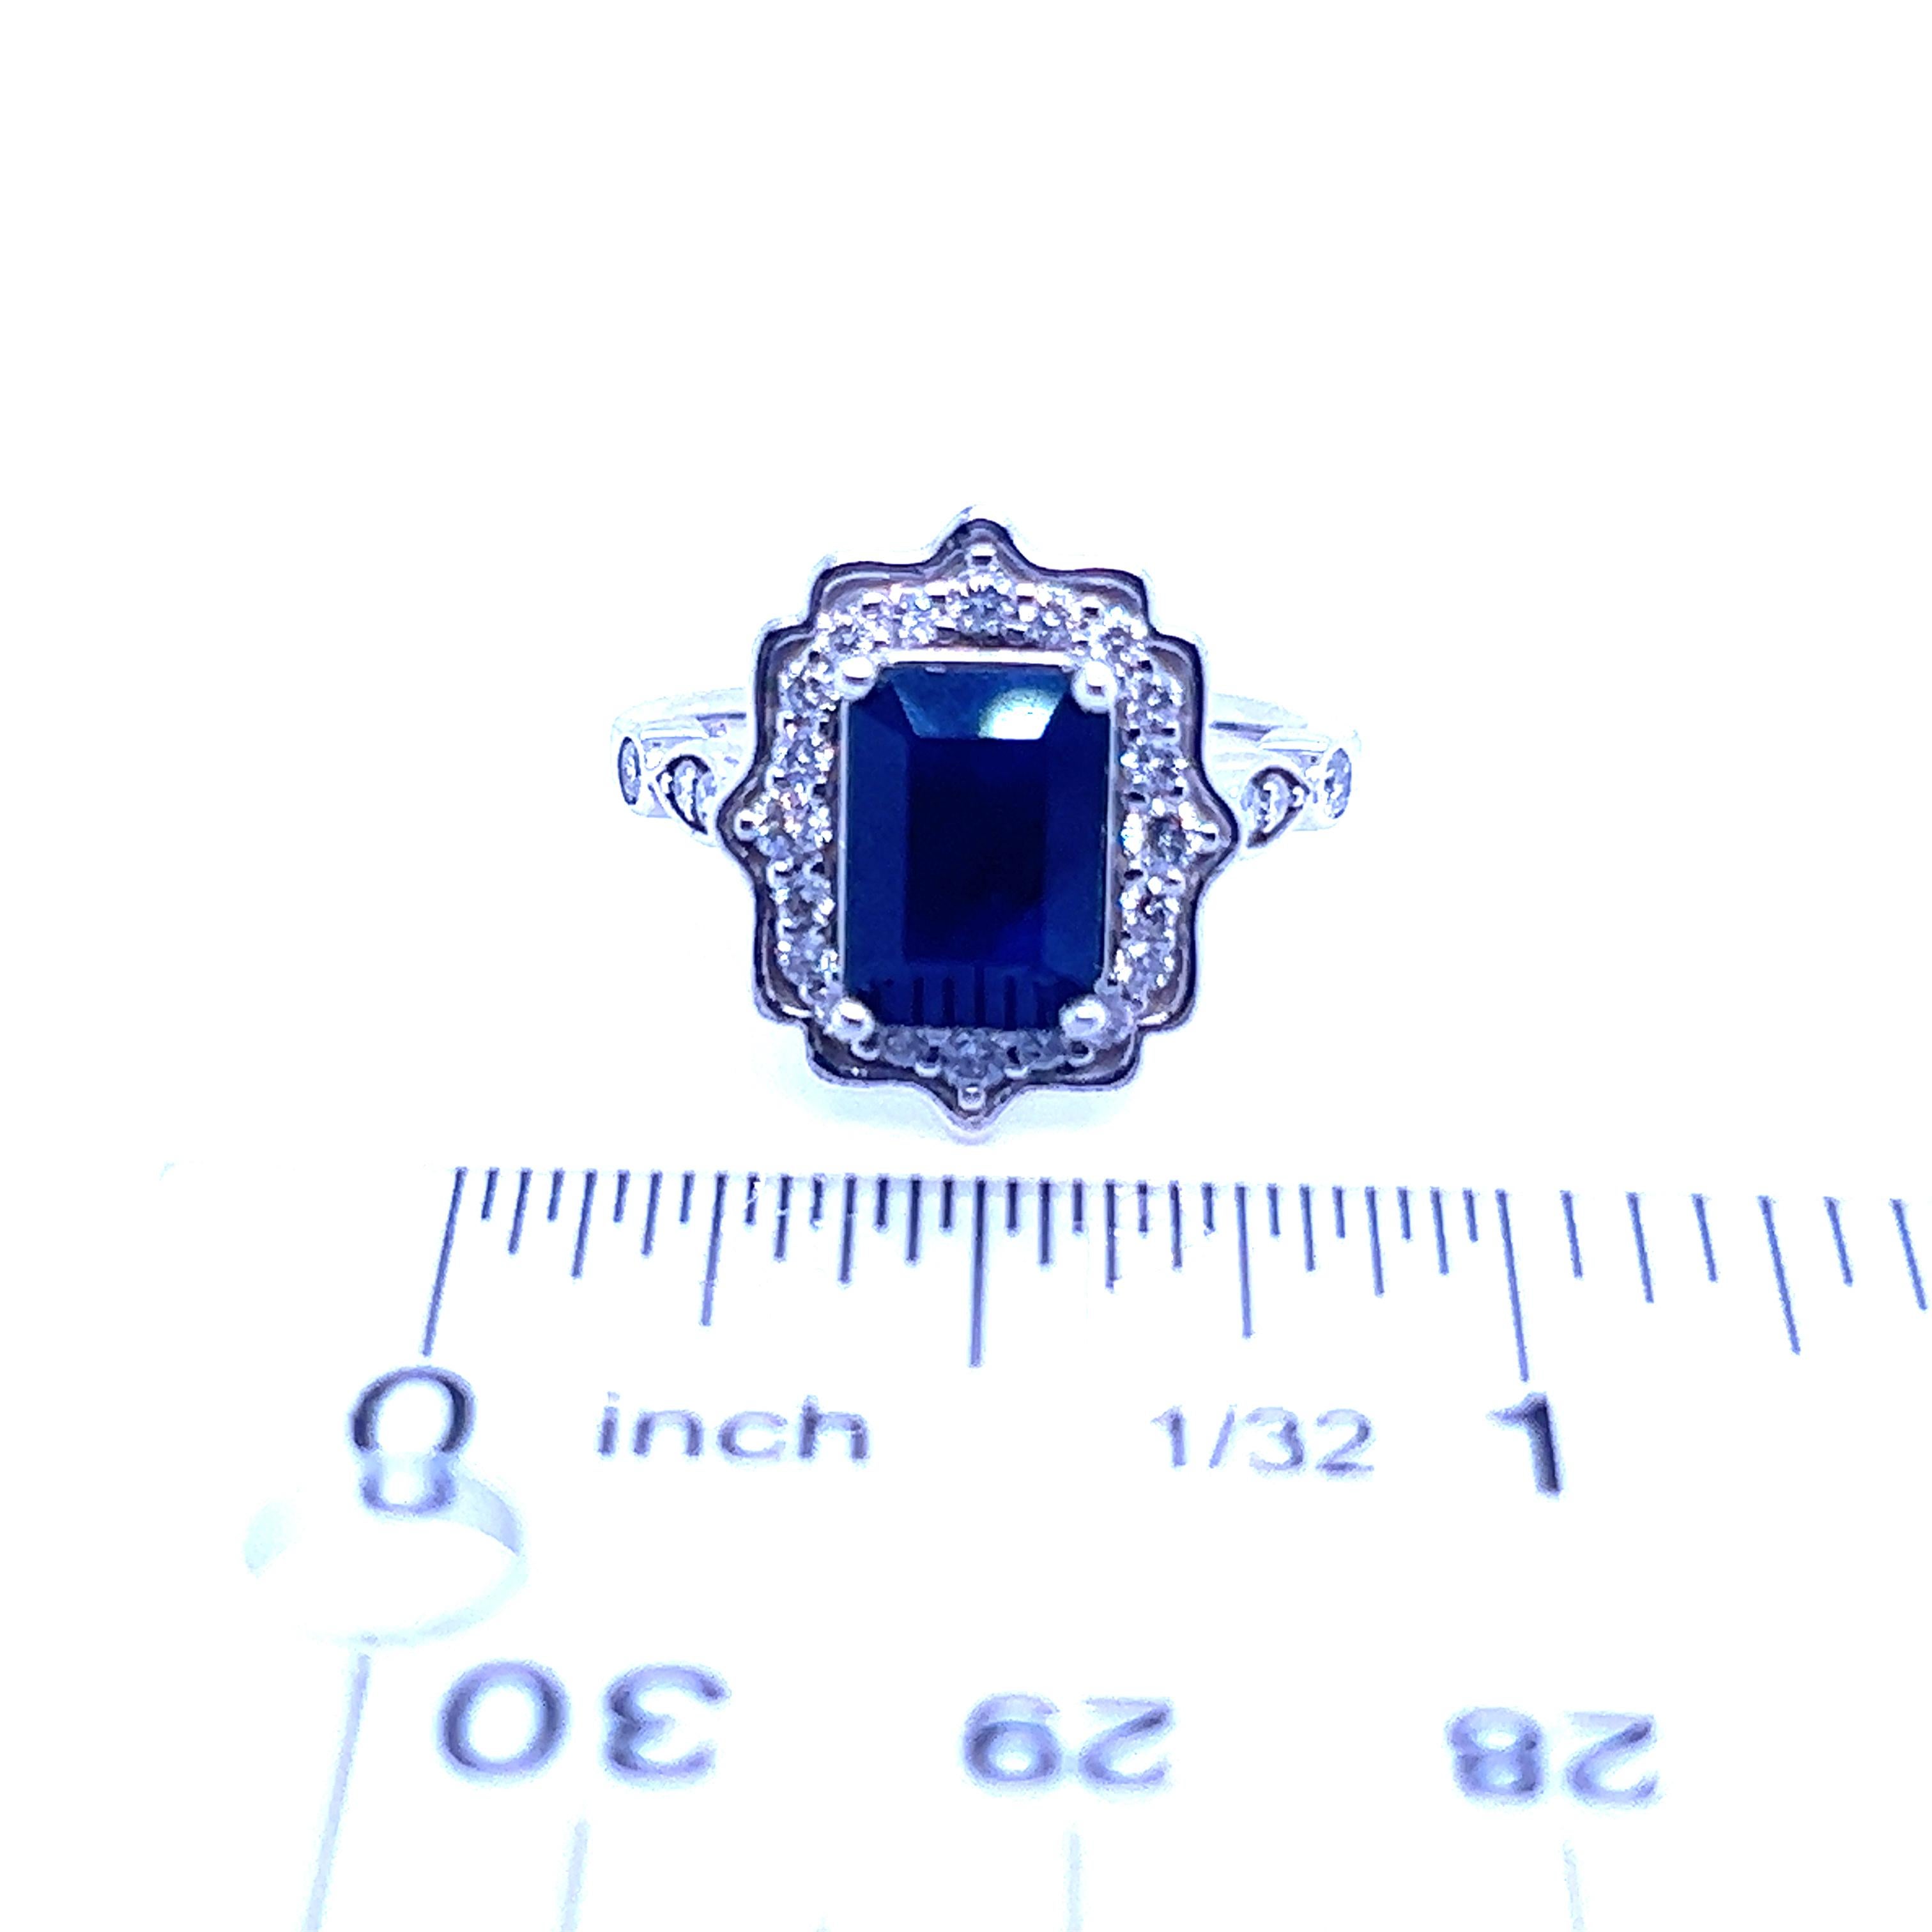 Emerald Cut Natural Sapphire Diamond Ring 6.5 14k White Gold 3.51 TCW Certified For Sale